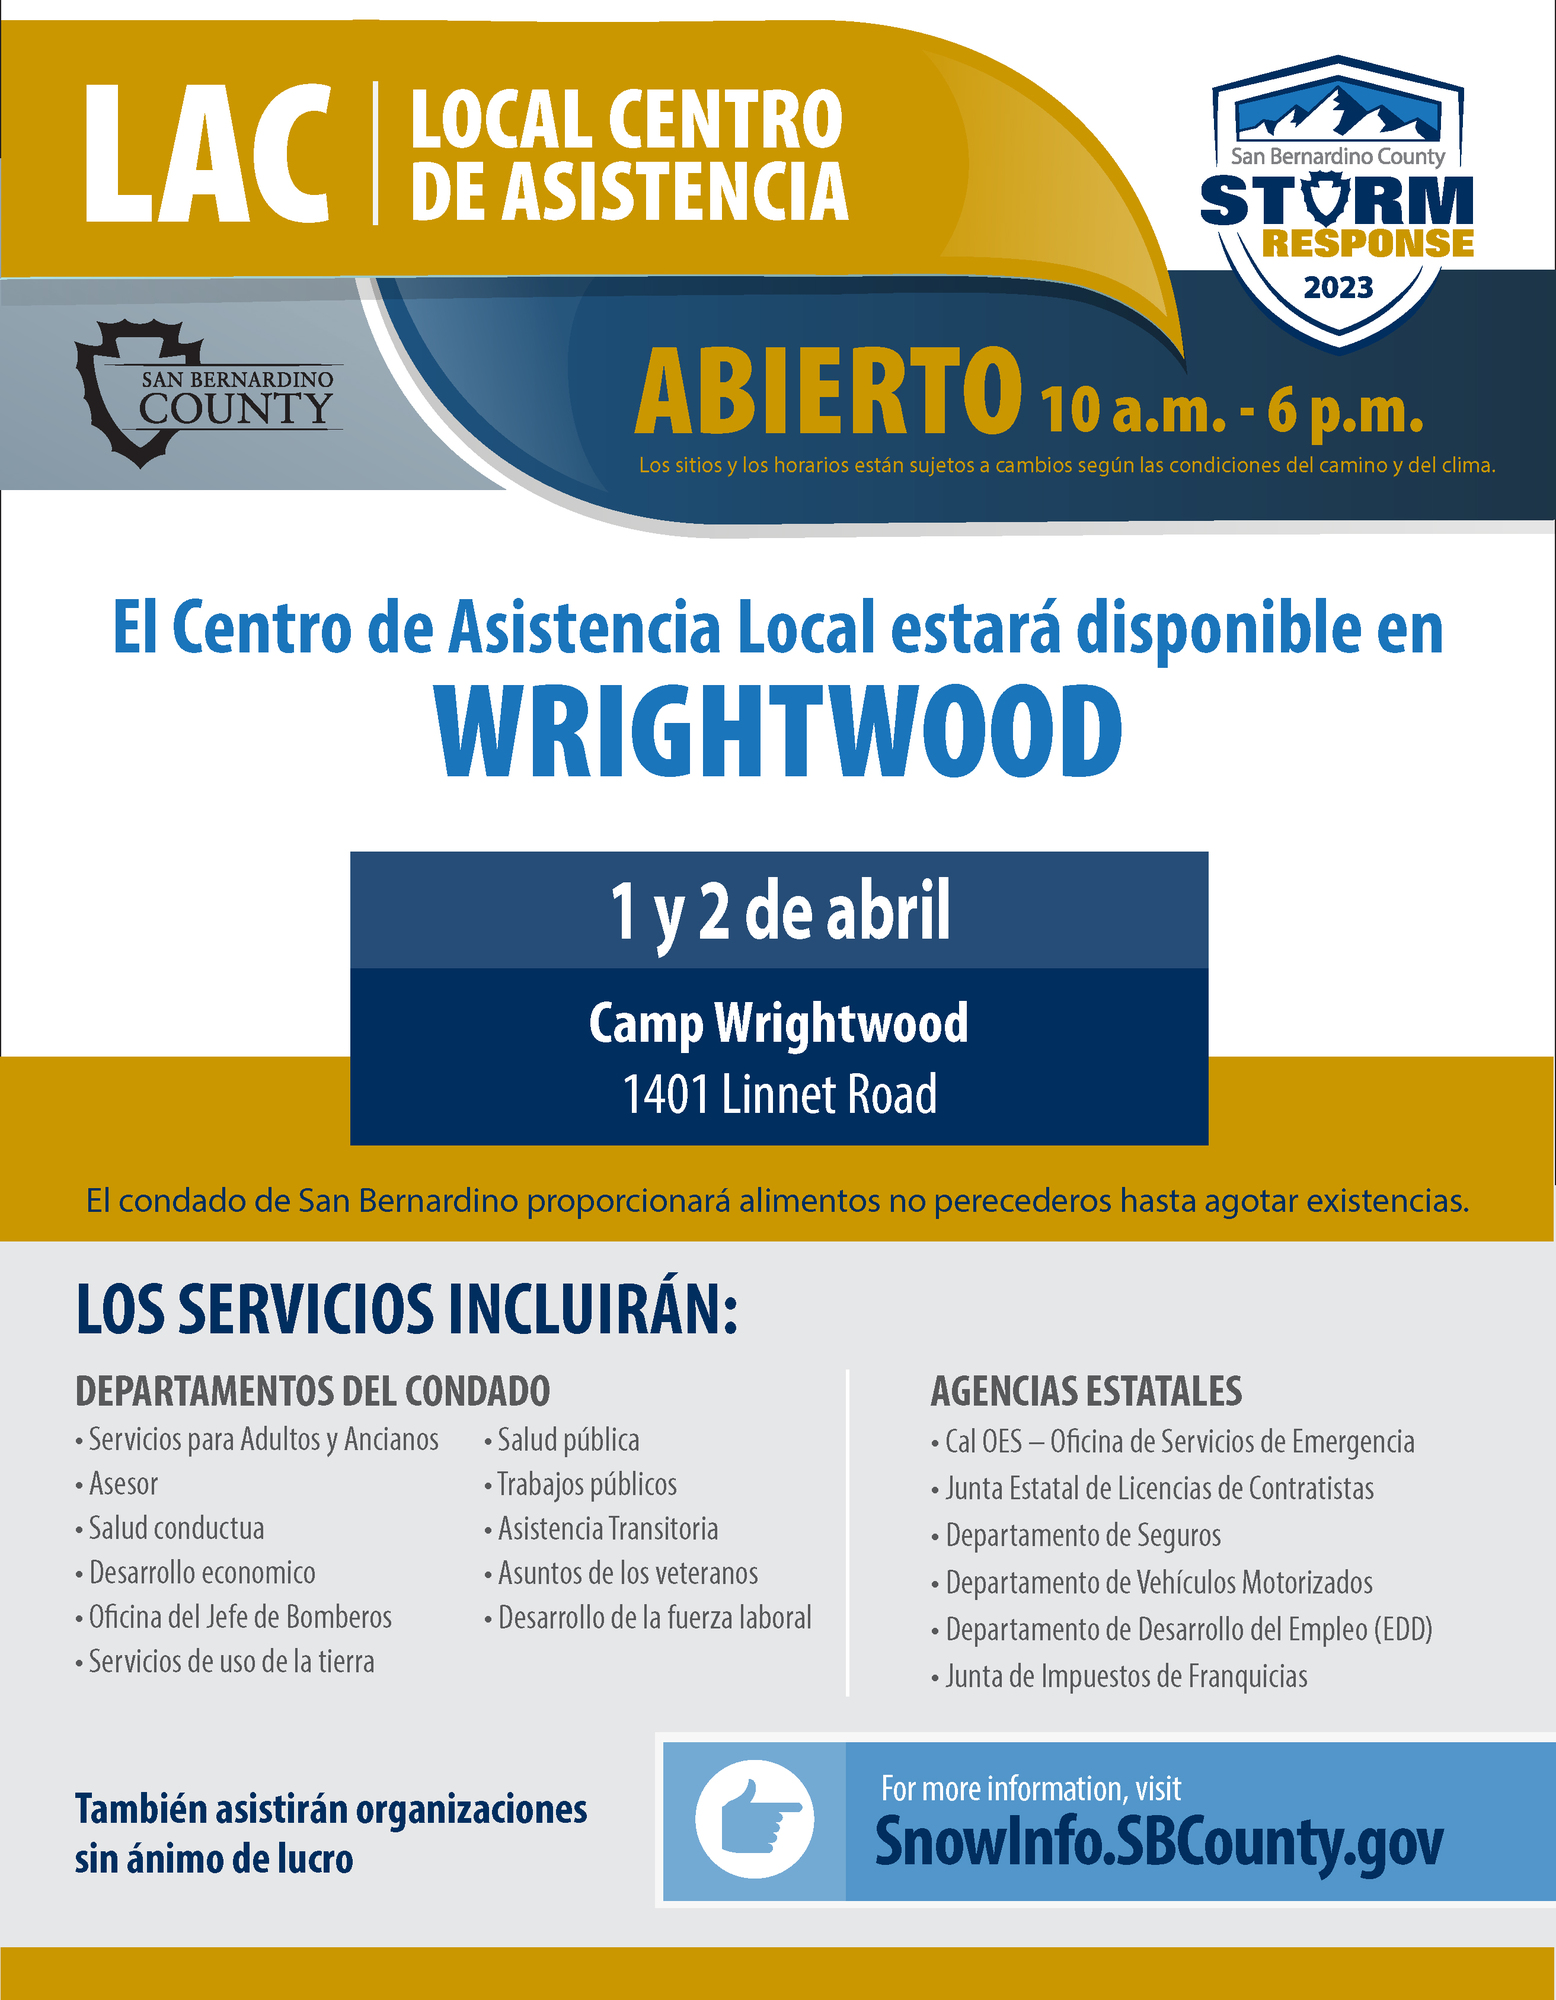 LAC Wrightwood , April 1-2, Spanish